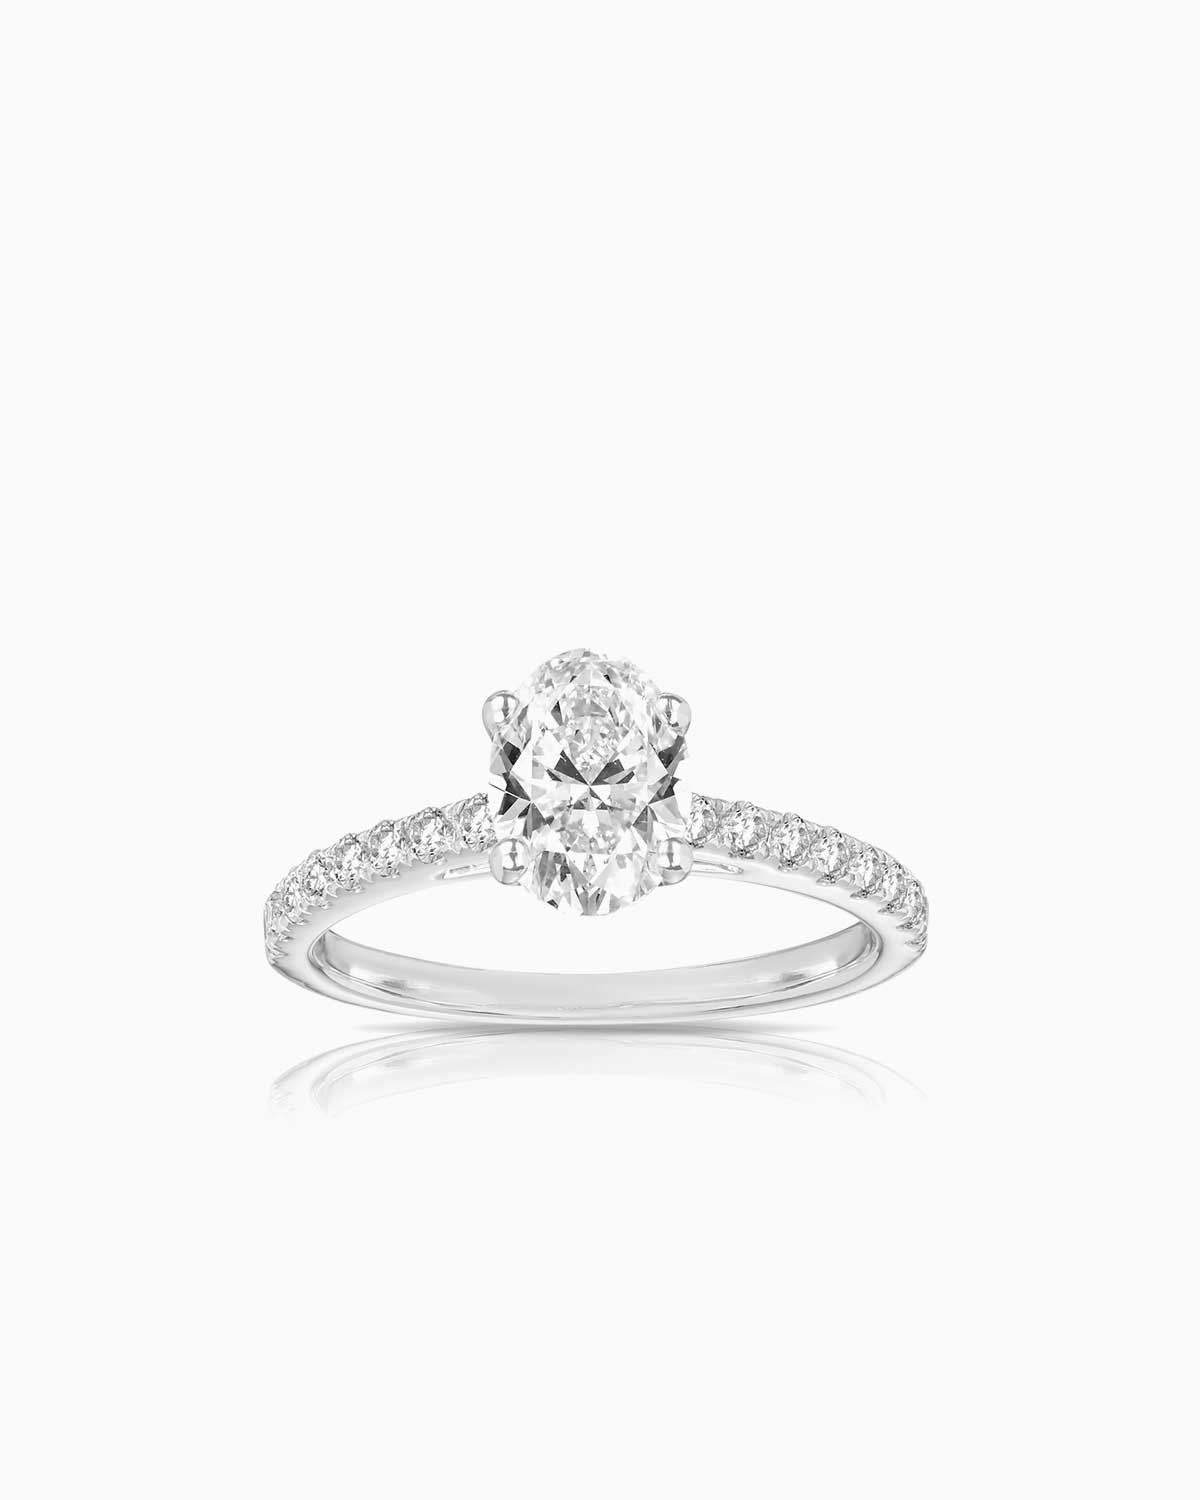 oval diamond engagement ring featuring shoulder diamonds and set in 18 karat white gold by claude and me jewellery